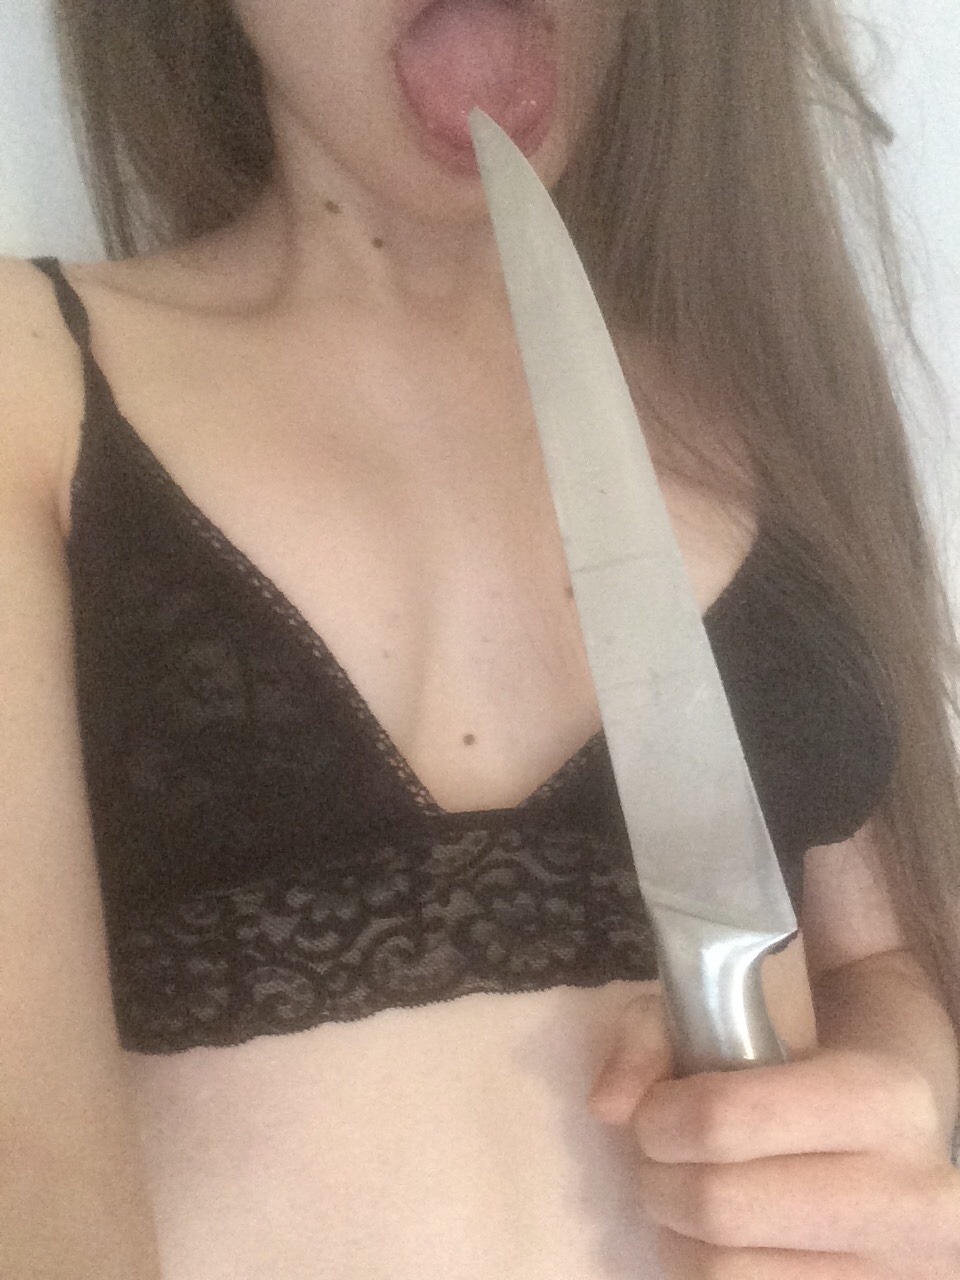 crybaby–angel:  Little girl playing with a knife 🔪